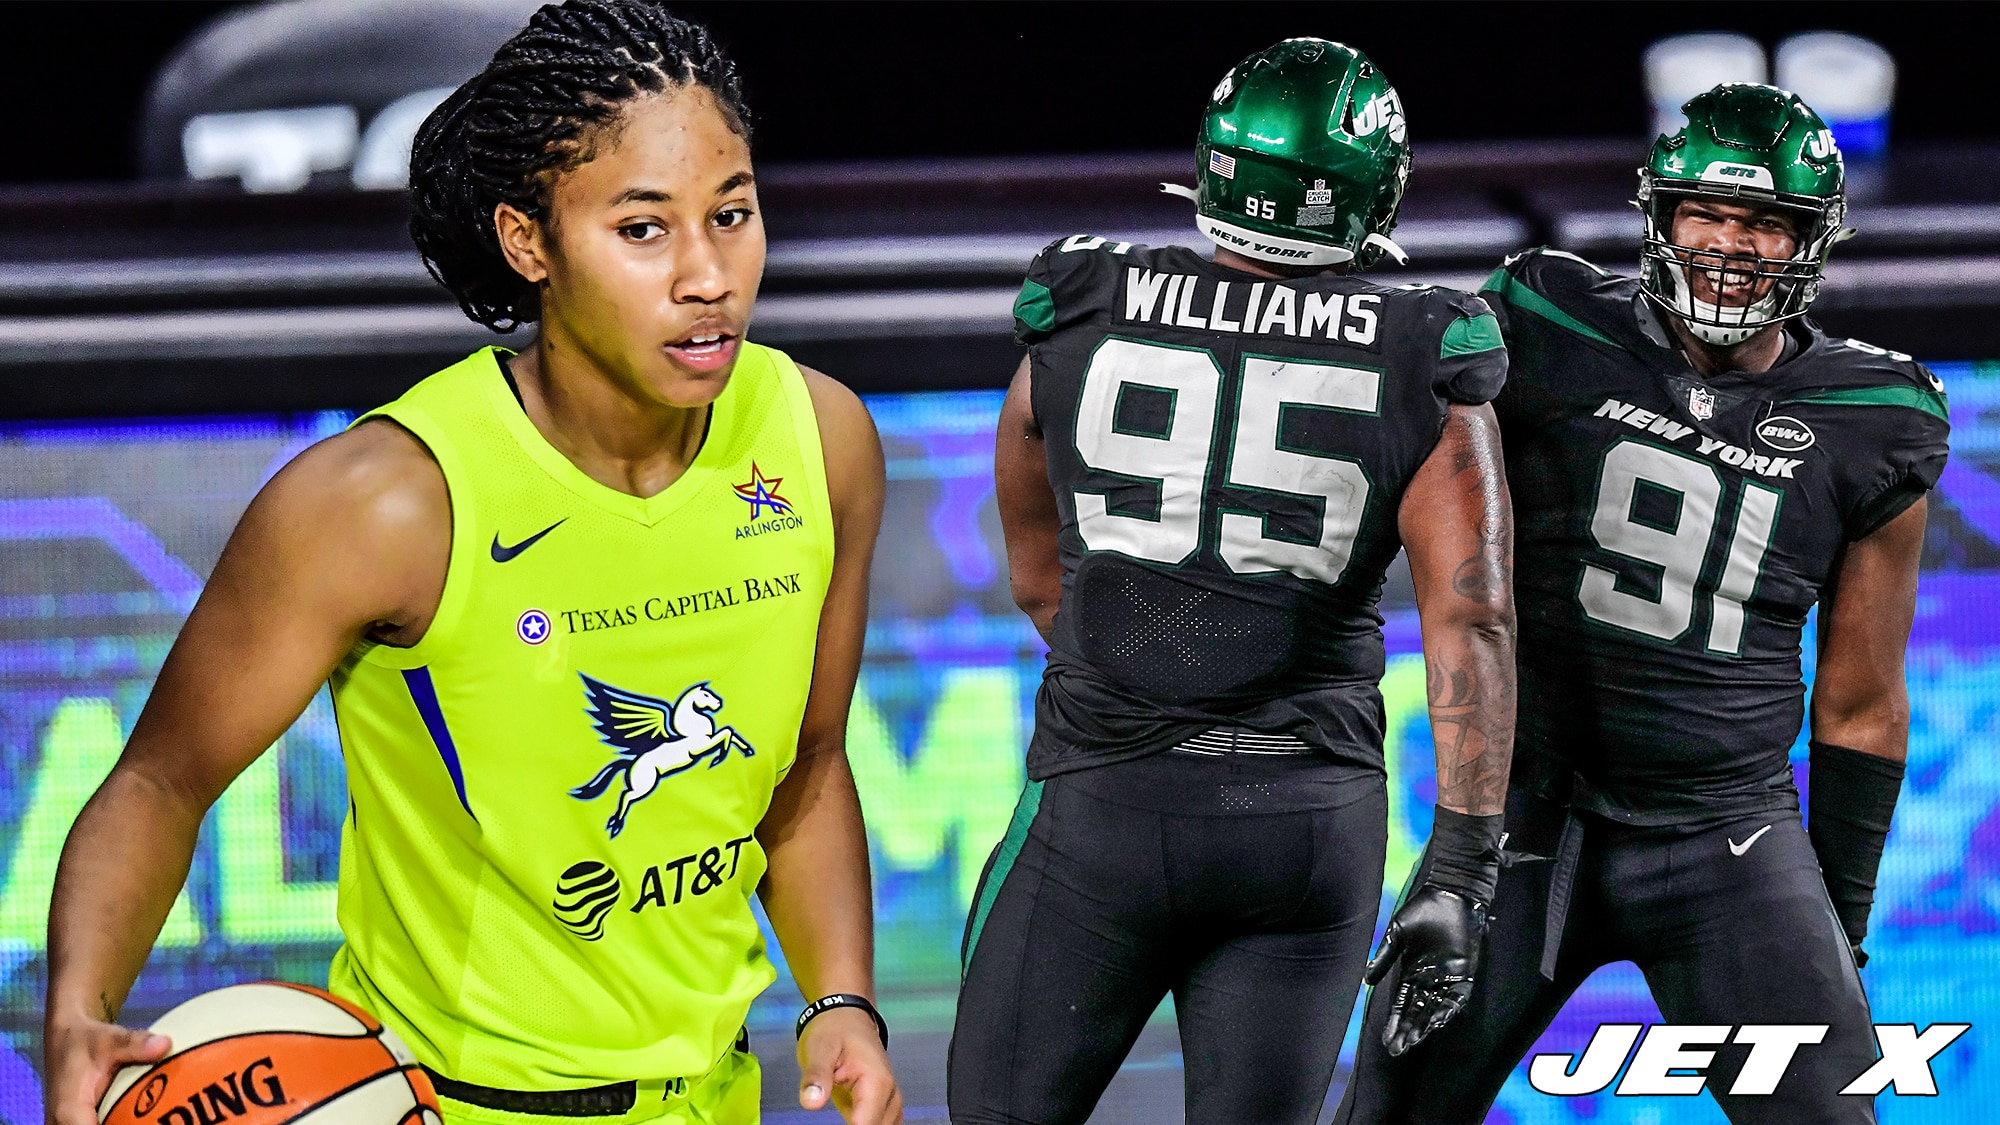 Dallas Wings, New York Jets